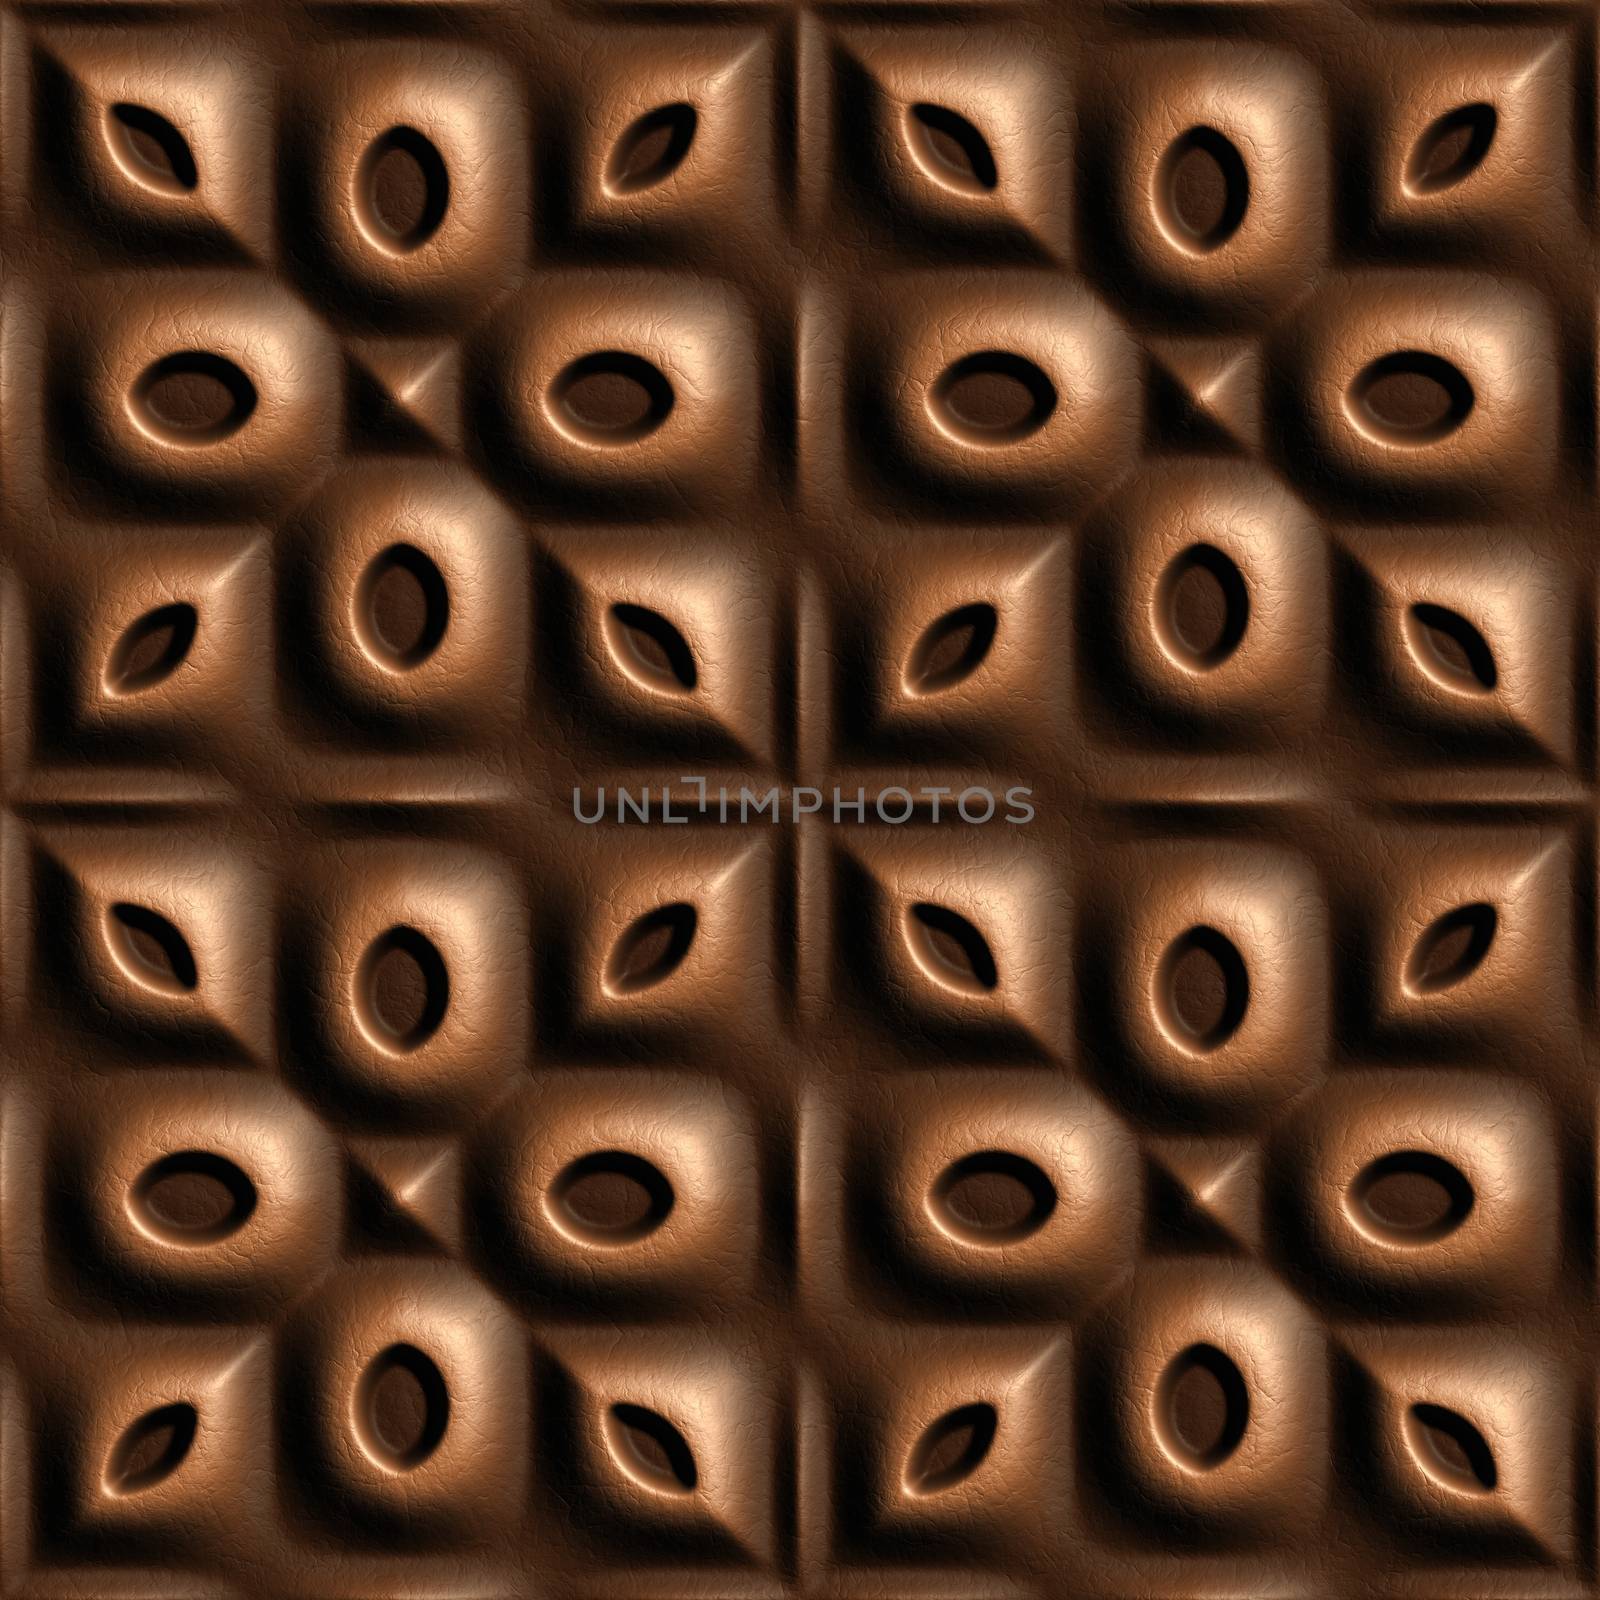 3d seamless tile pattern brown leather background.